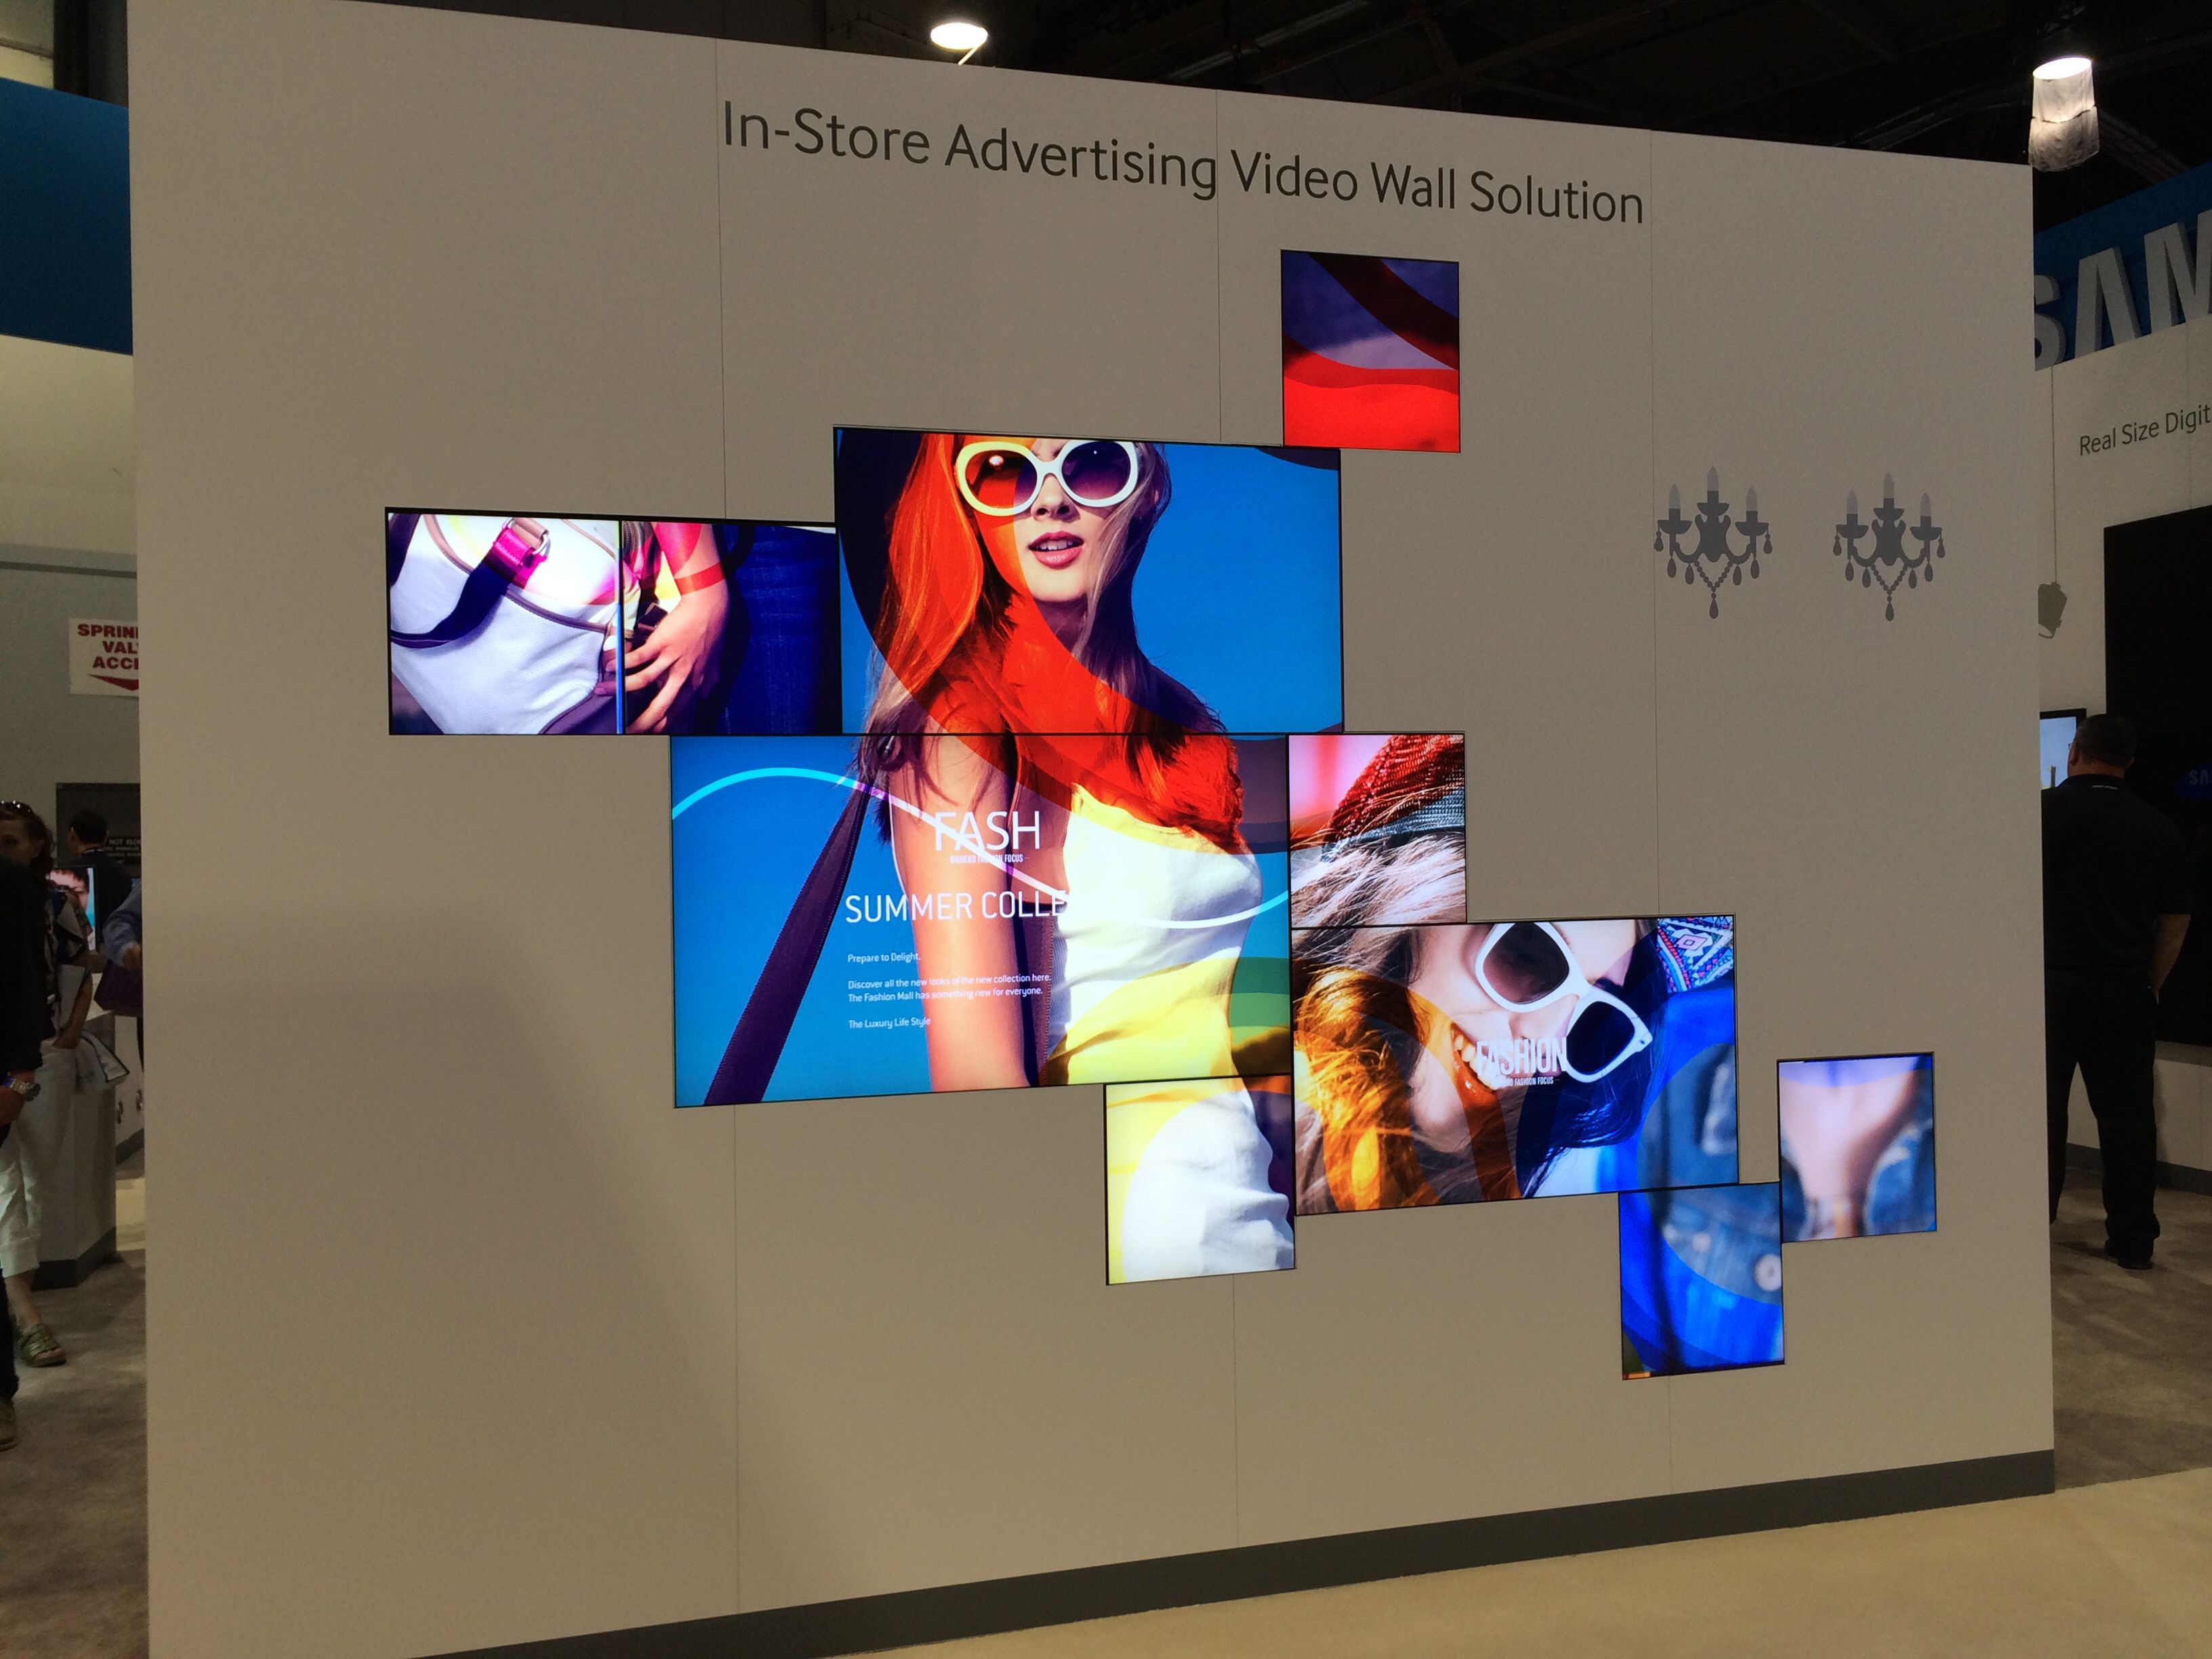 In-Store Advertising Video Wall Solution In Retail